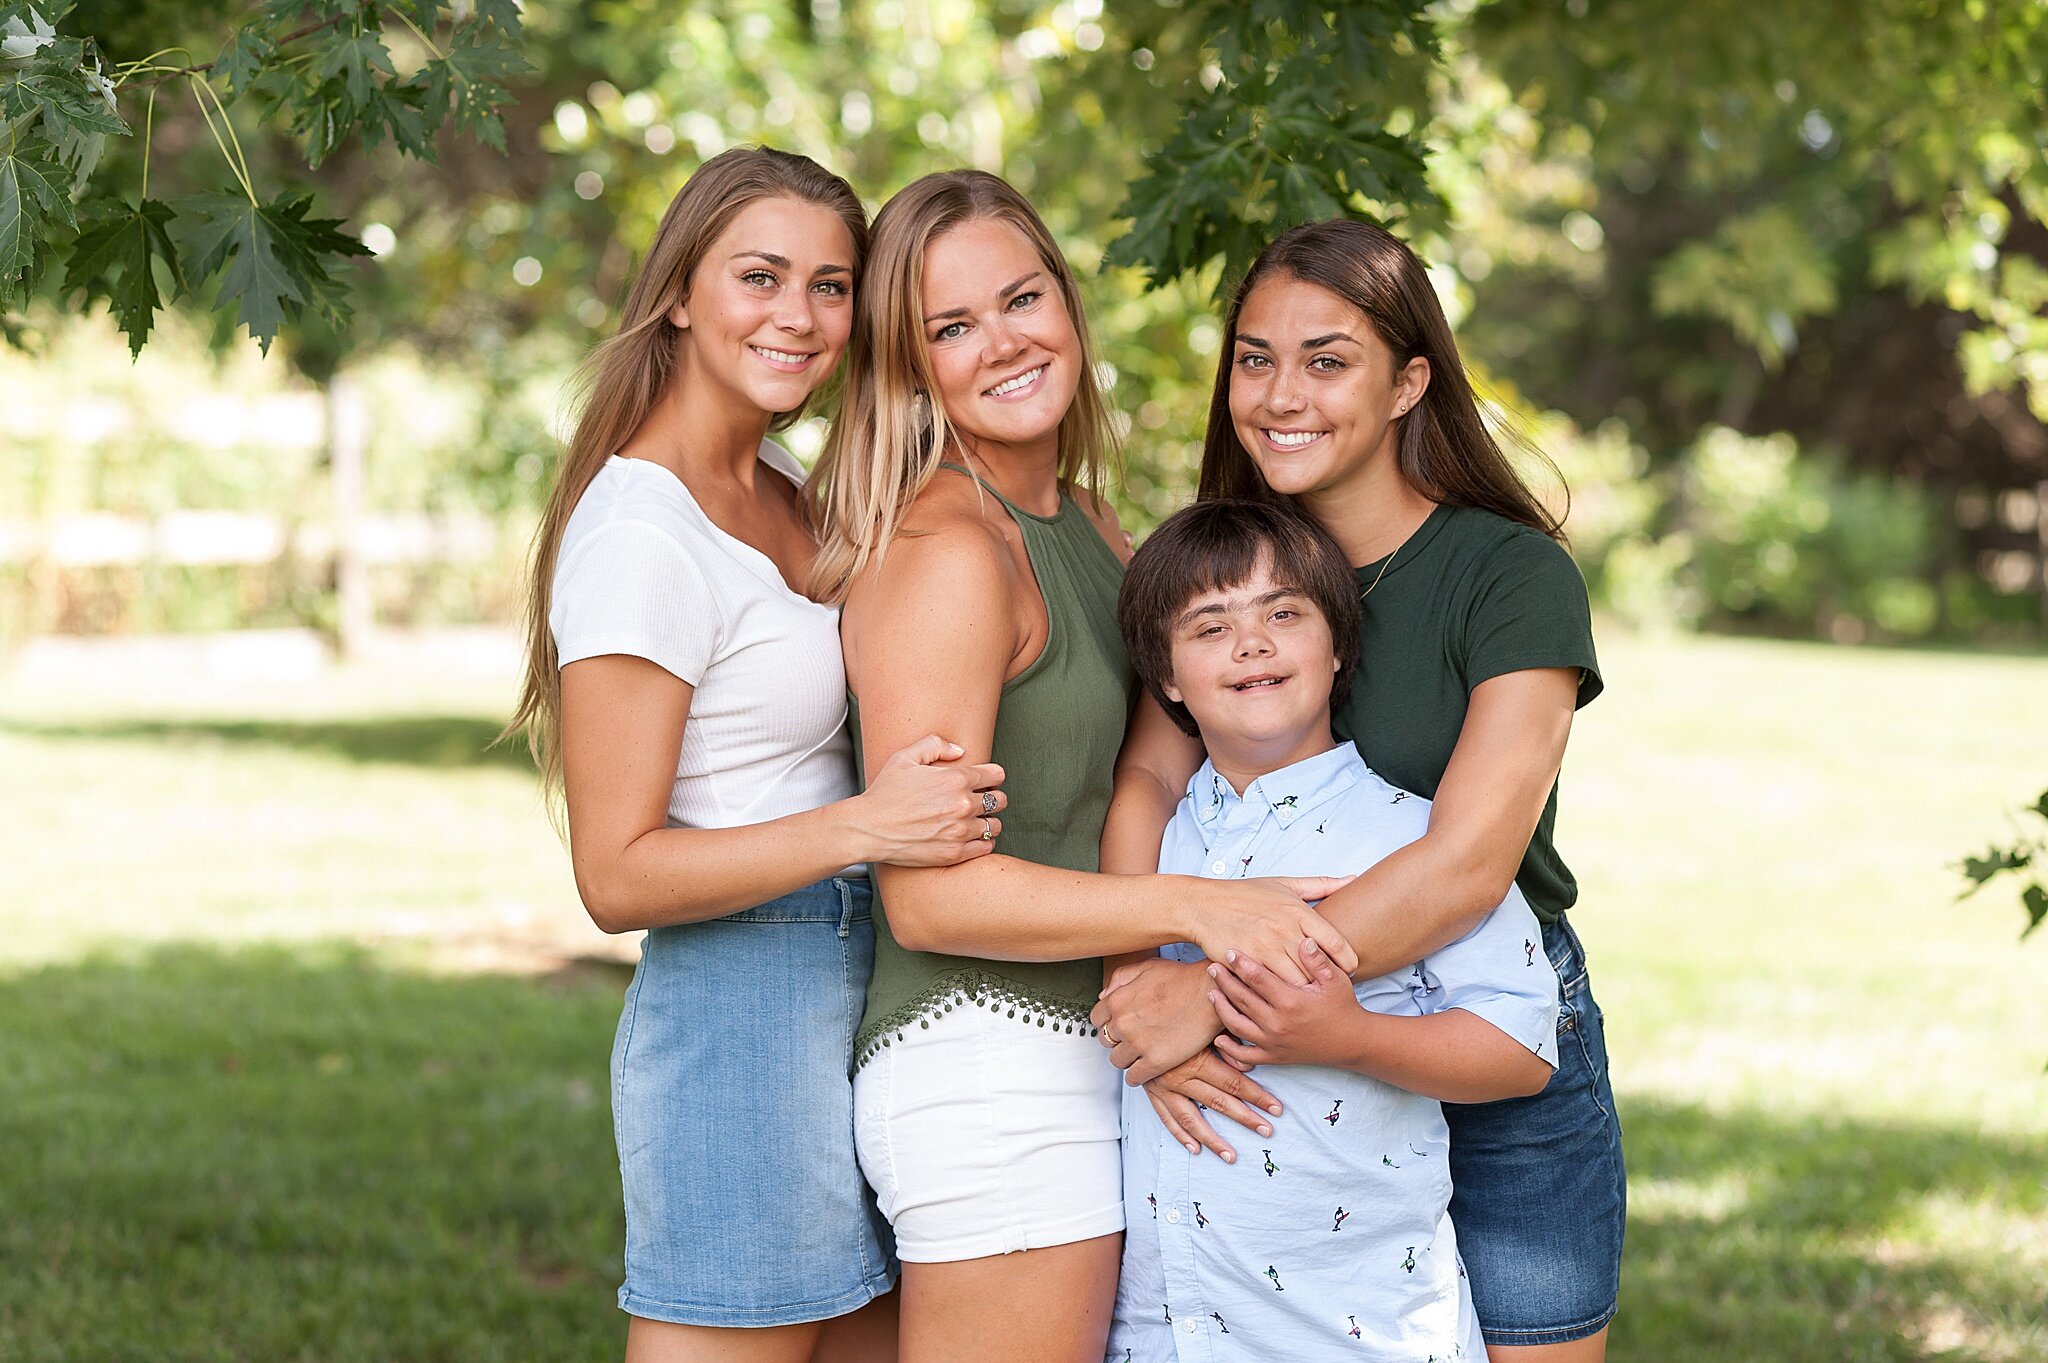 Wendy Zook Photography | Frederick MD family photographer, MD family photographer, Frederick family photographer, Maryland family photographer, Celebrate the Special Photo Sessions, Down Syndrome awareness, Frederick MD Down Syndrome Awareness photographer